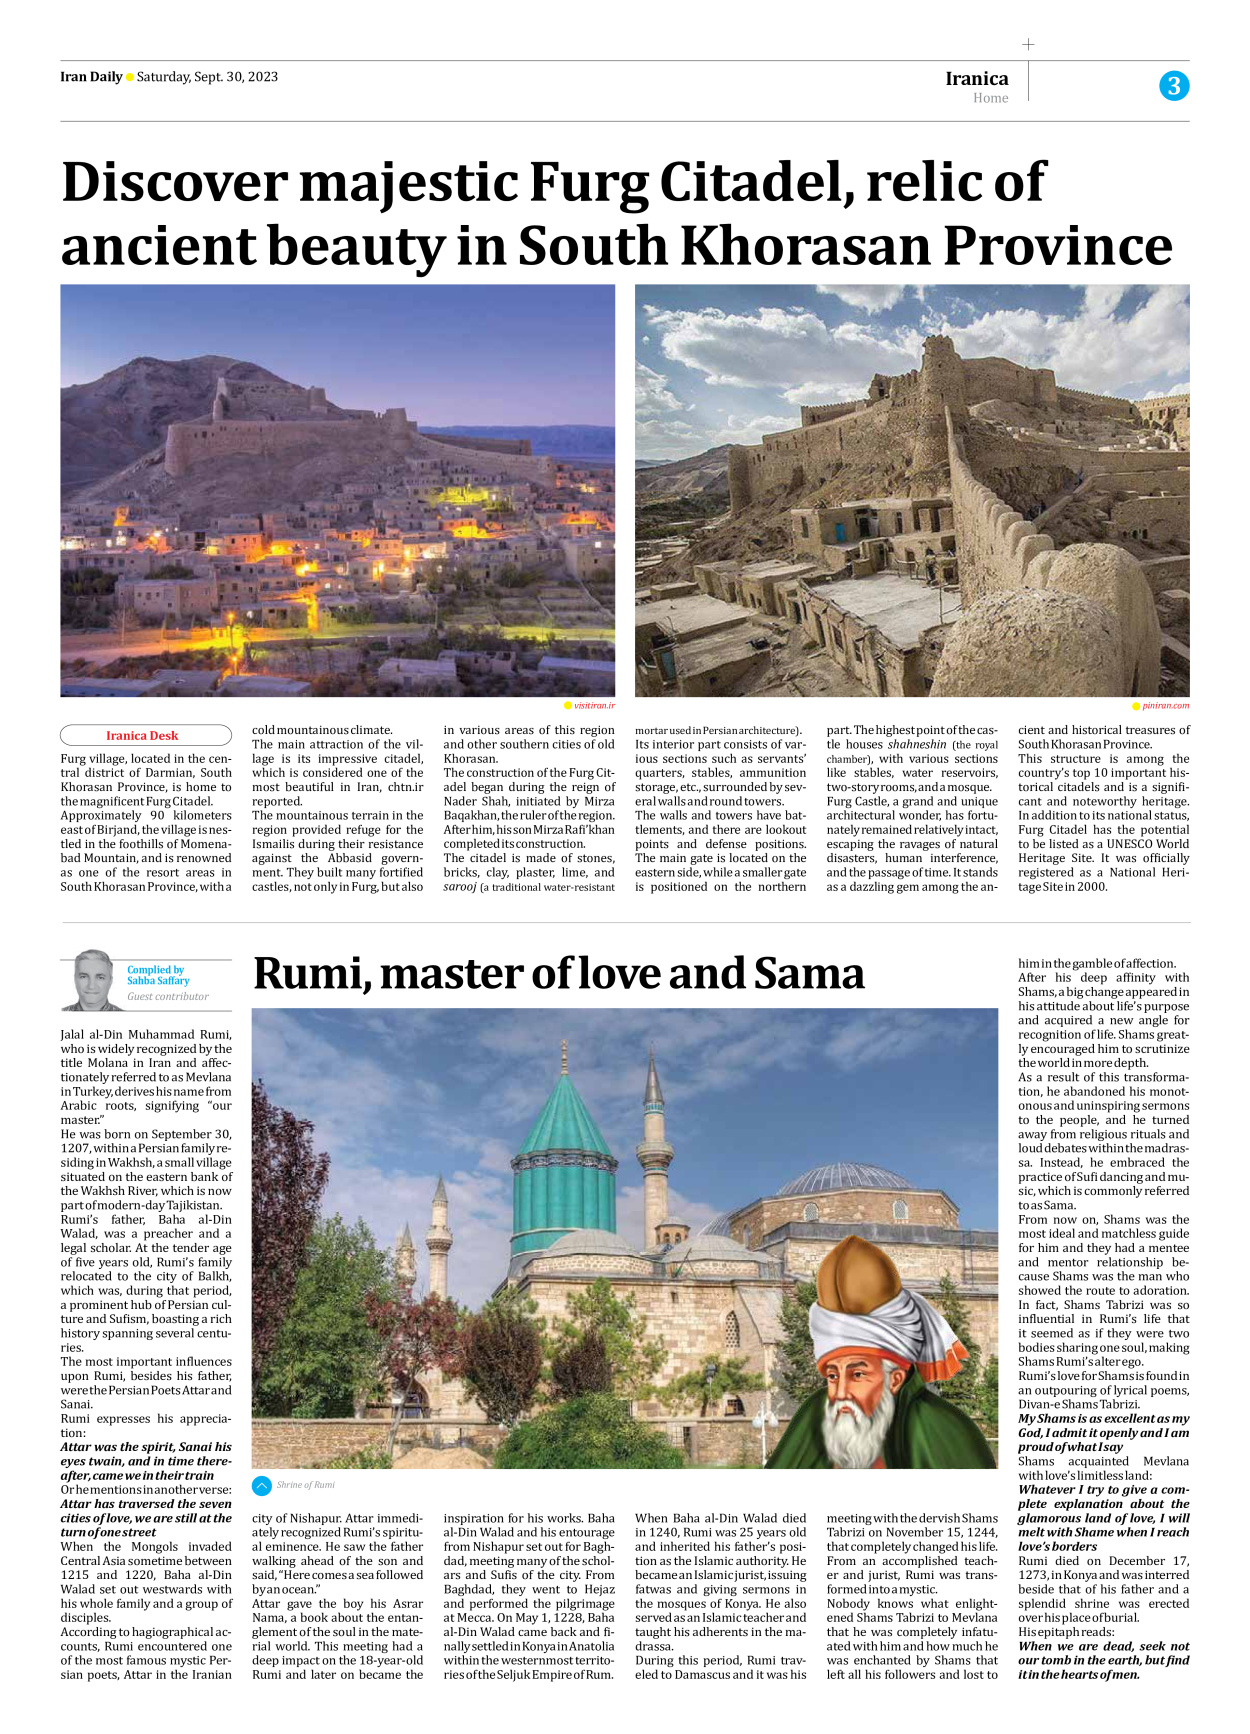 Iran Daily - Number Seven Thousand Three Hundred and Ninety Six - 30 September 2023 - Page 3